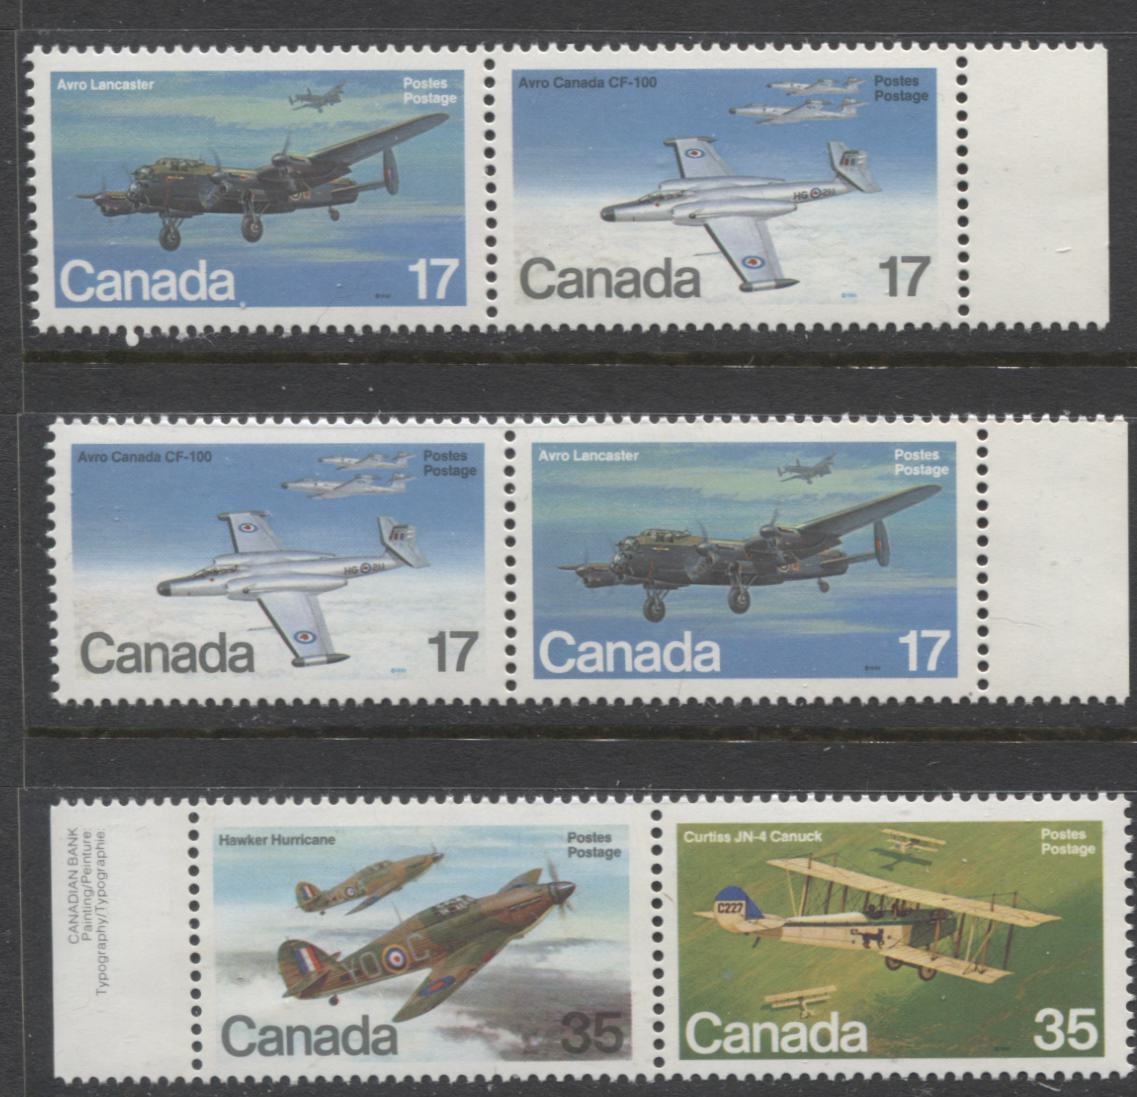 Lot 377 Canada #874a, 876a 17c Multicoloured Military Aircraft, 1980 Military Aircraft Issue, 3 VFNH Horizontal Se-Tenant Pairs, Donut Flaws on Plane Near Left Engine, Below Cockpit & Wheel Assembly, DF2/LF3 Paper, Possibly Tertiary, Various Positions